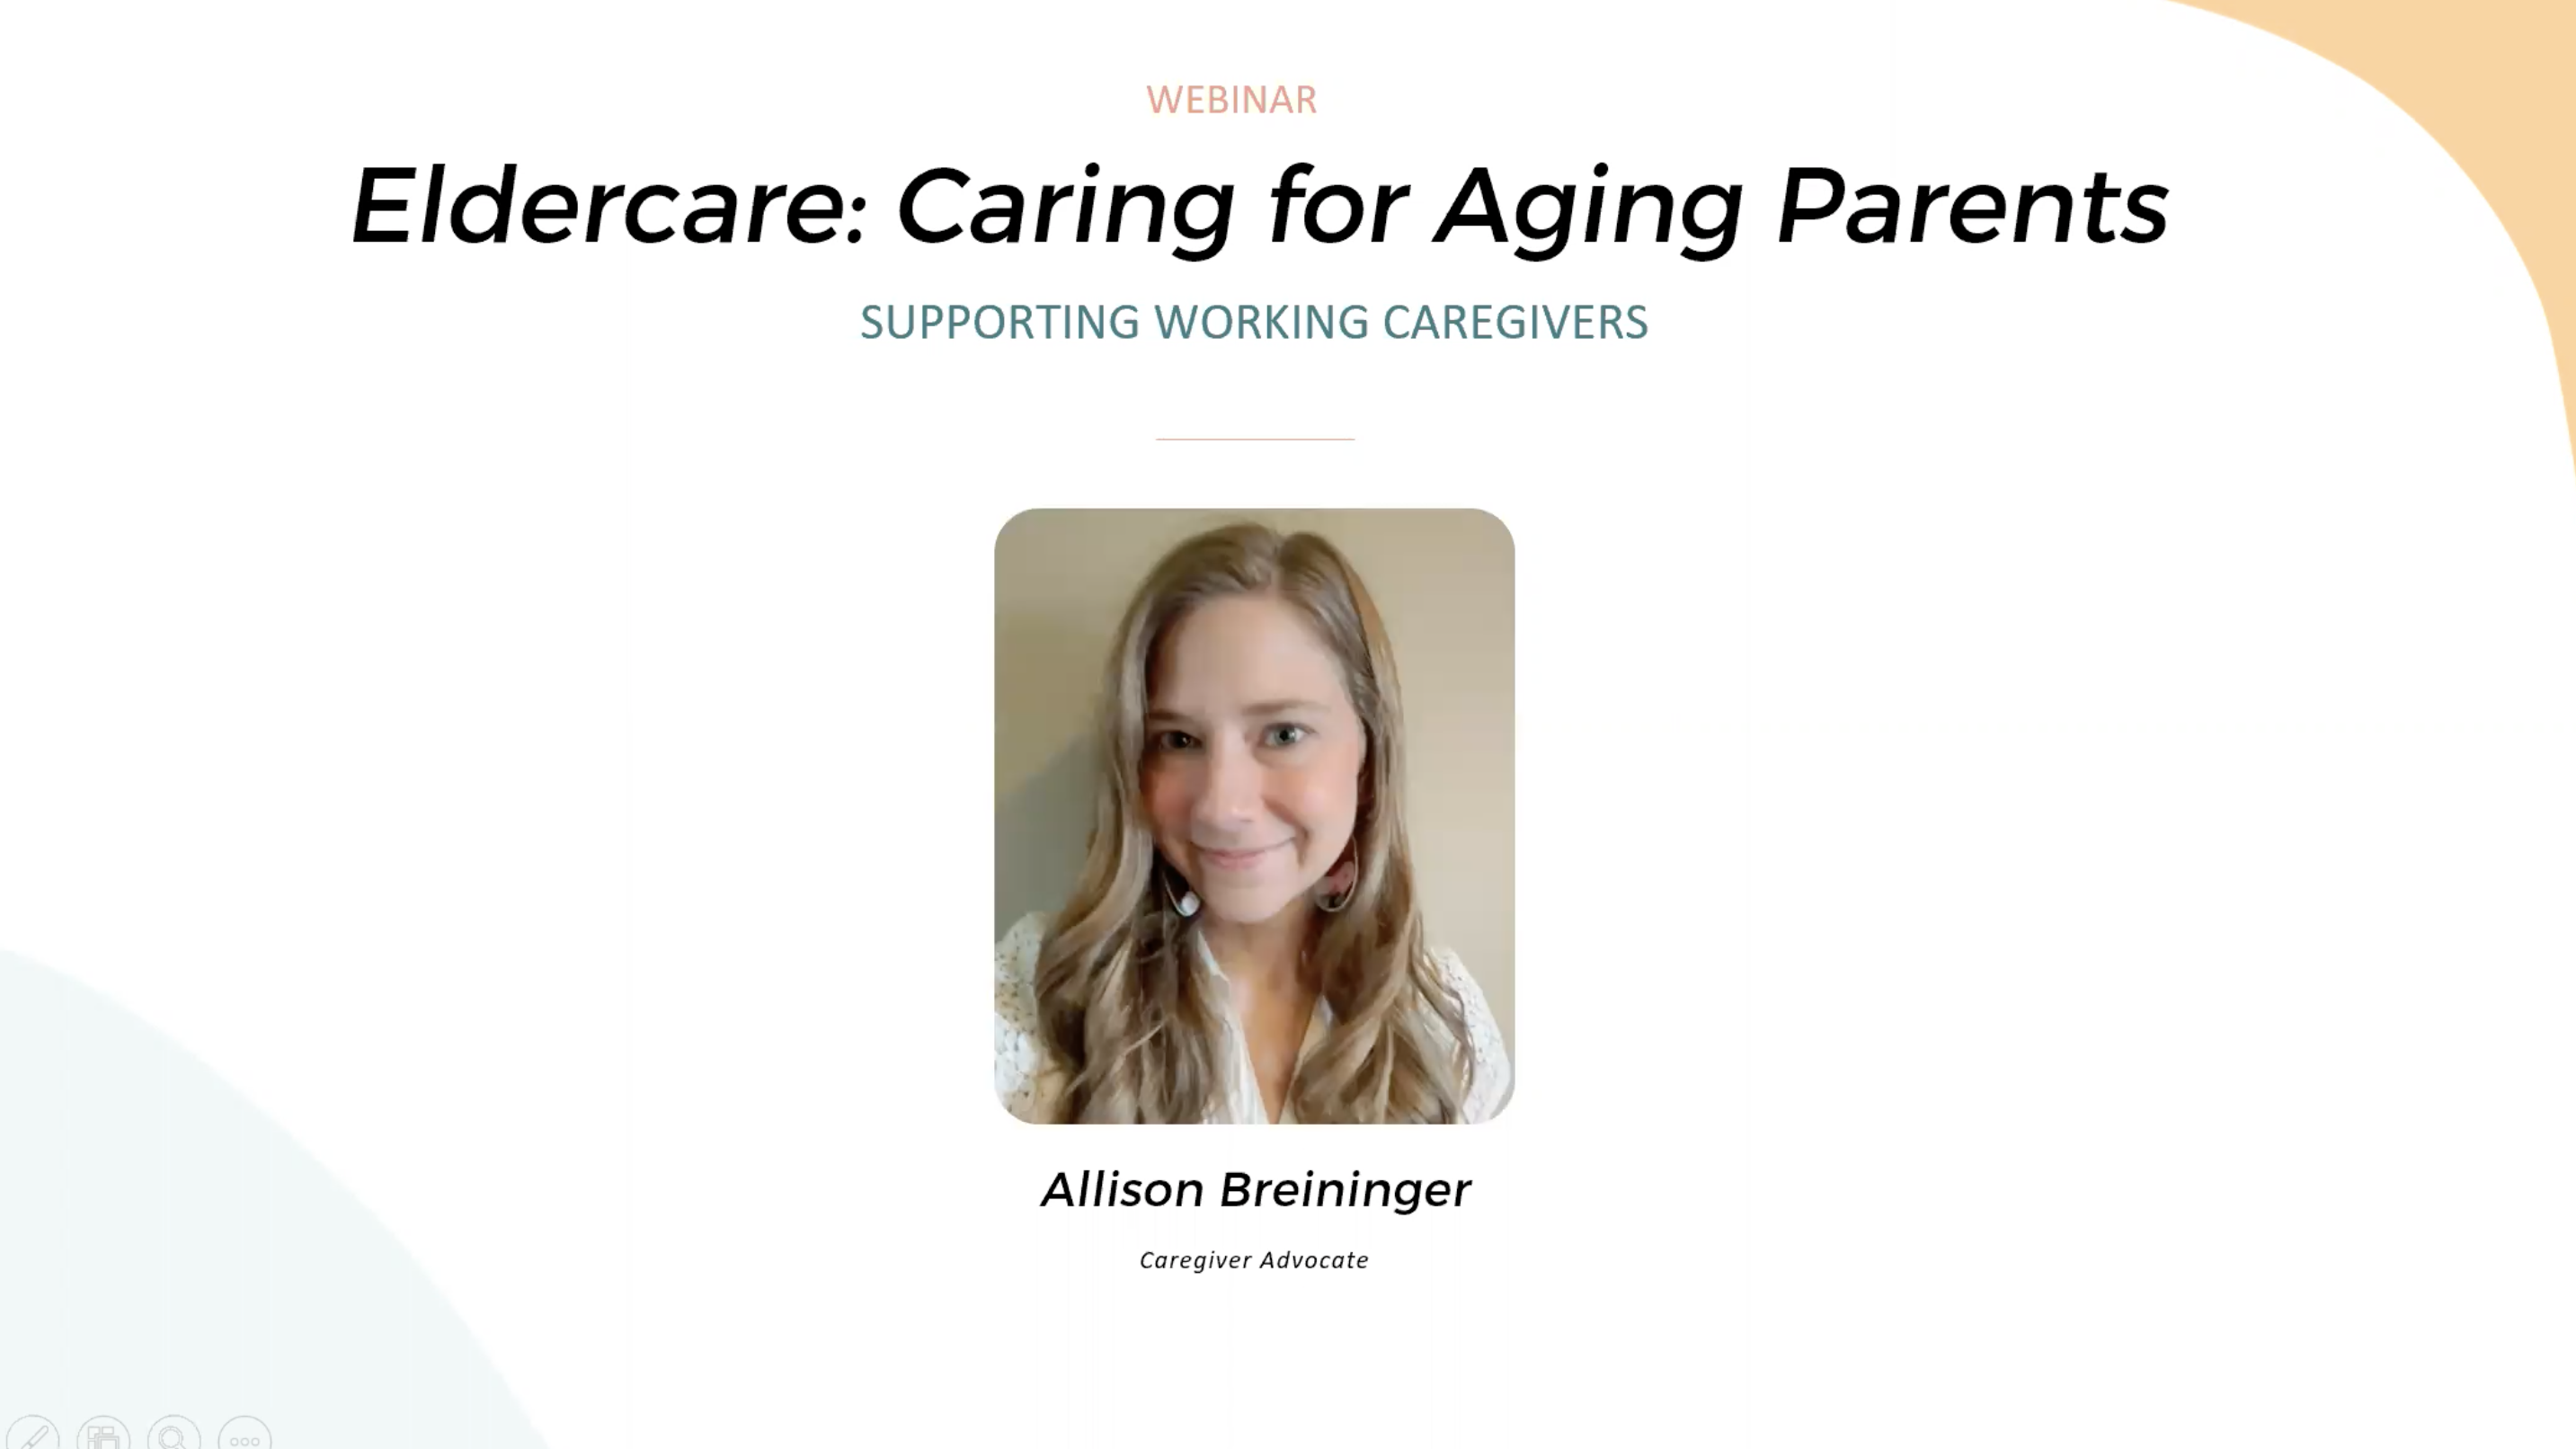 Watch: Eldercare - Caring for Aging Parents